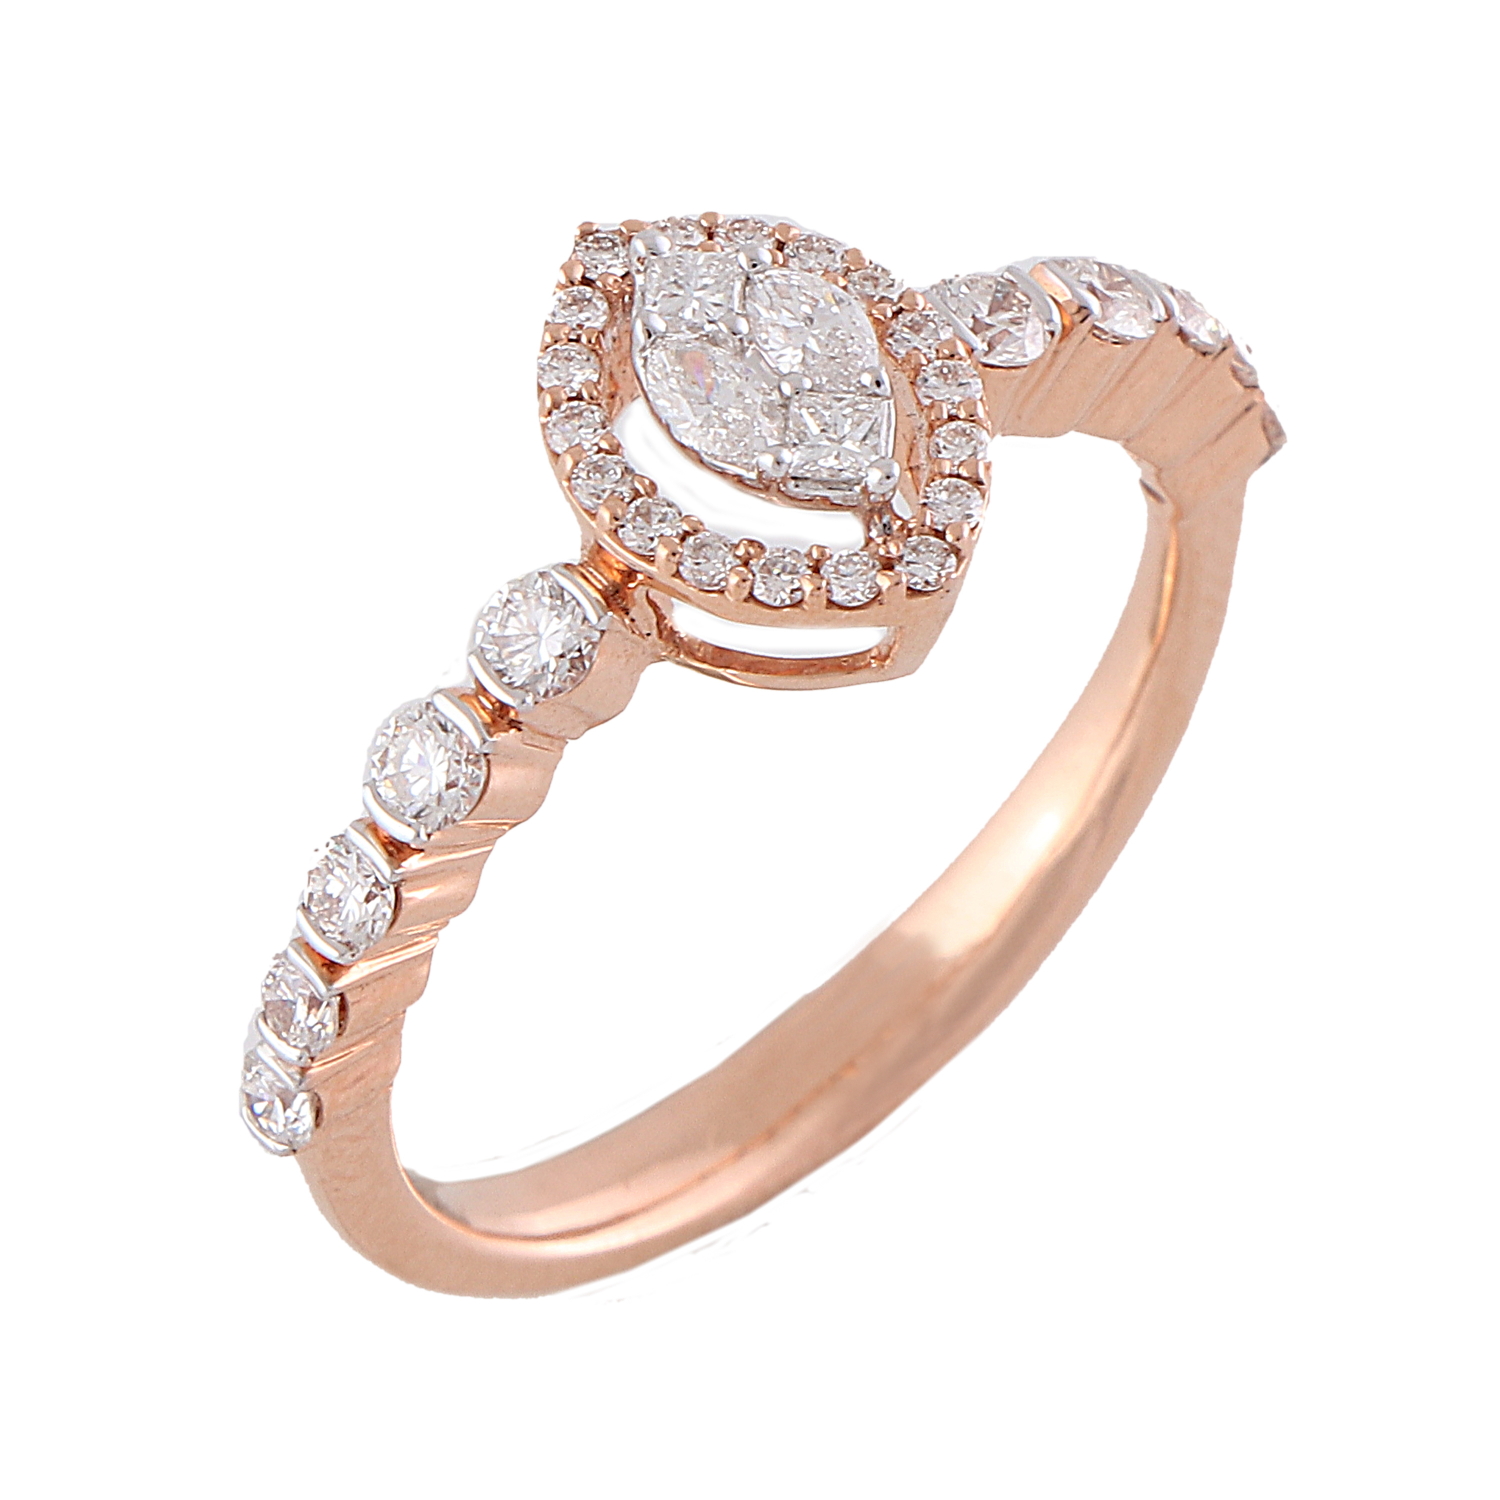 Round Diamond Engagement With Floral Halo and Milgrain Details S3311 - Fana